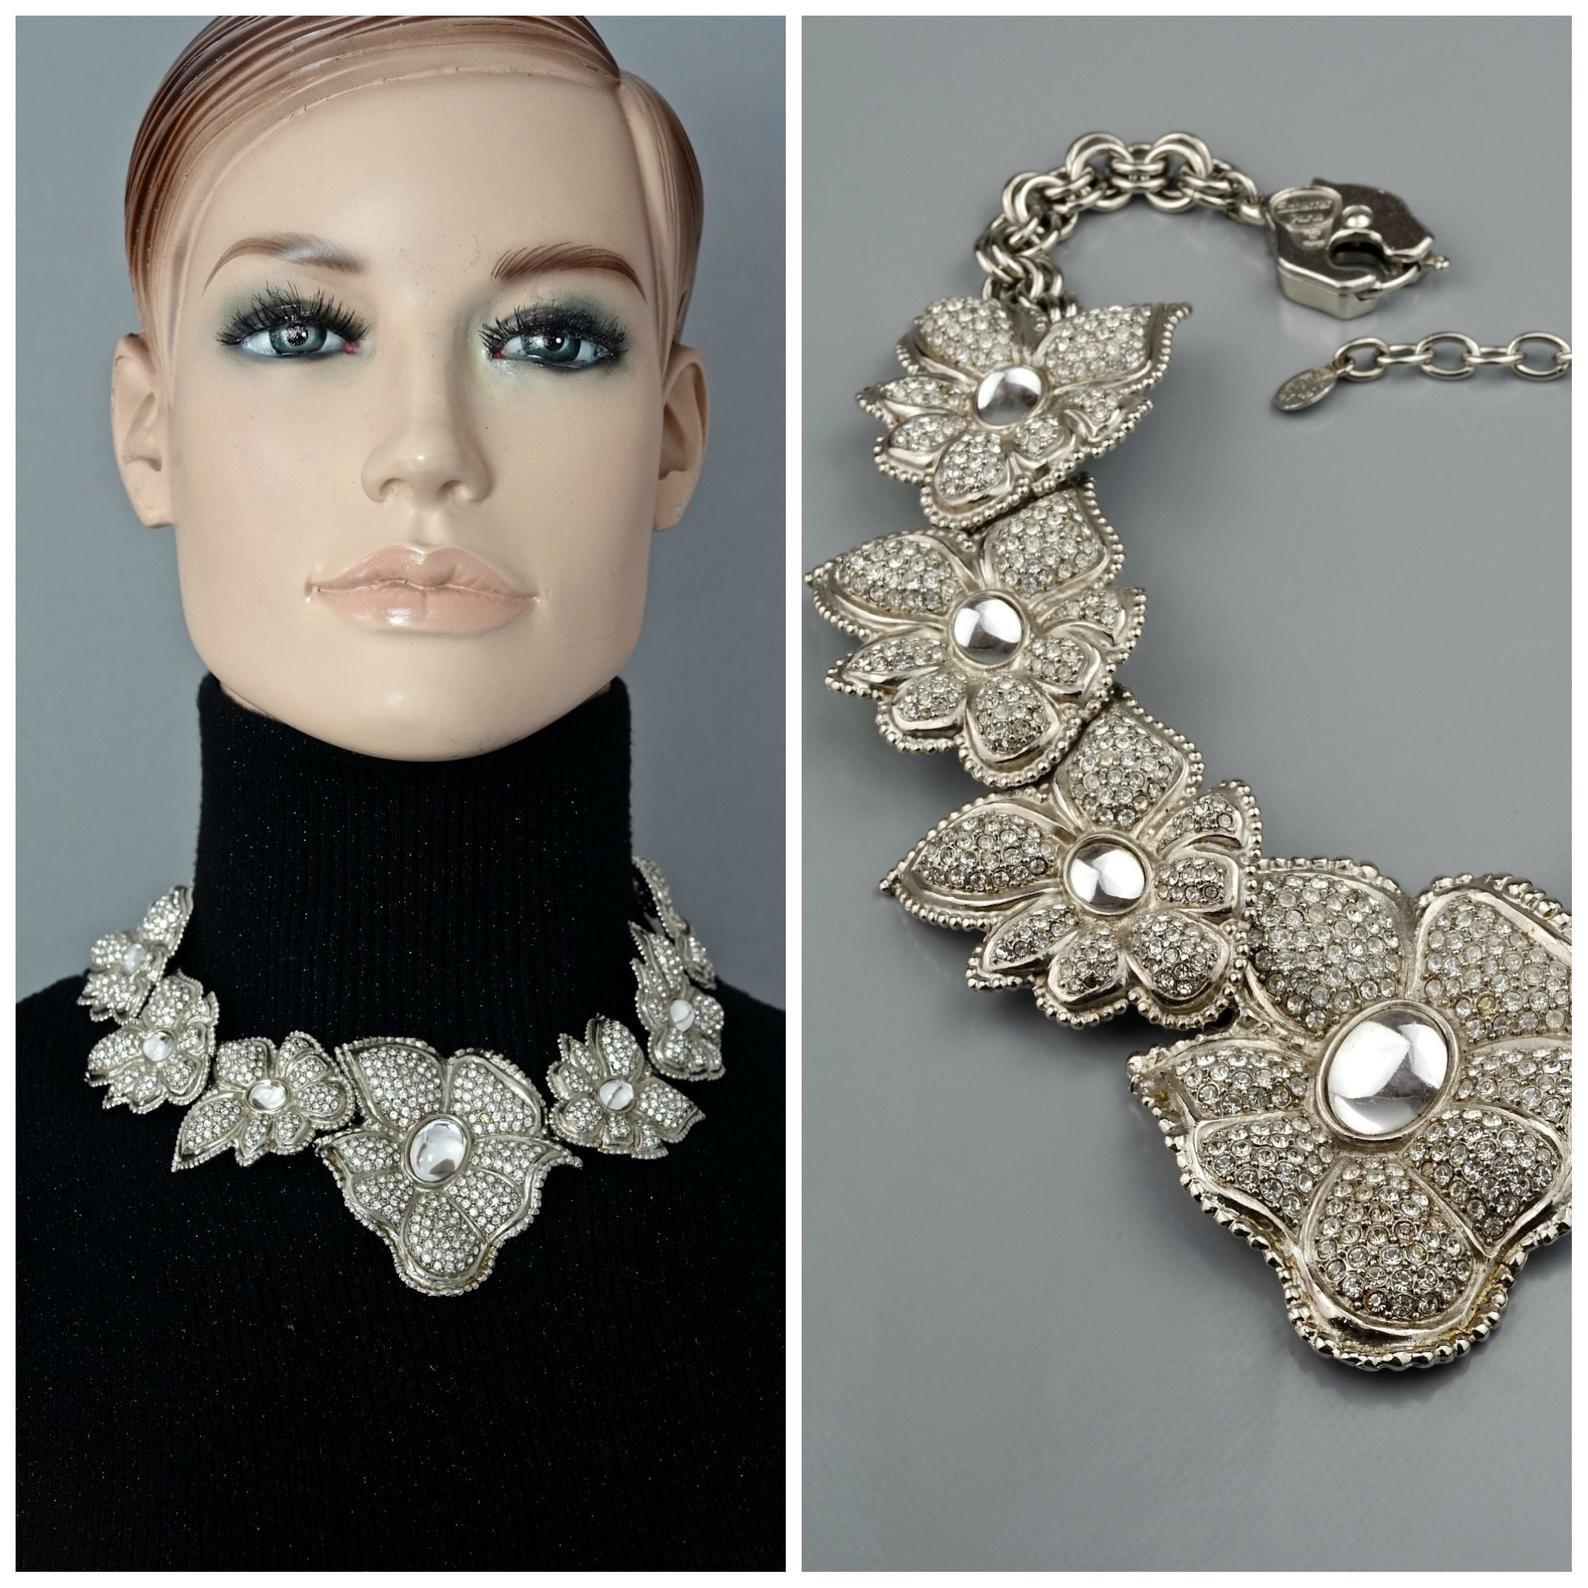 Vintage JEAN LOUIS SCHERRER Flower Rhinestone Link Silver Necklace

Measurements:
Height: 2.76 inches (7 cm)
Wearable Length: 16.73 inches to 17.91 inches (42.5 cm to 45.5 cm) 

Features:
- 100% Authentic JEAN LOUIS SCHERRER.
- Articulated flower